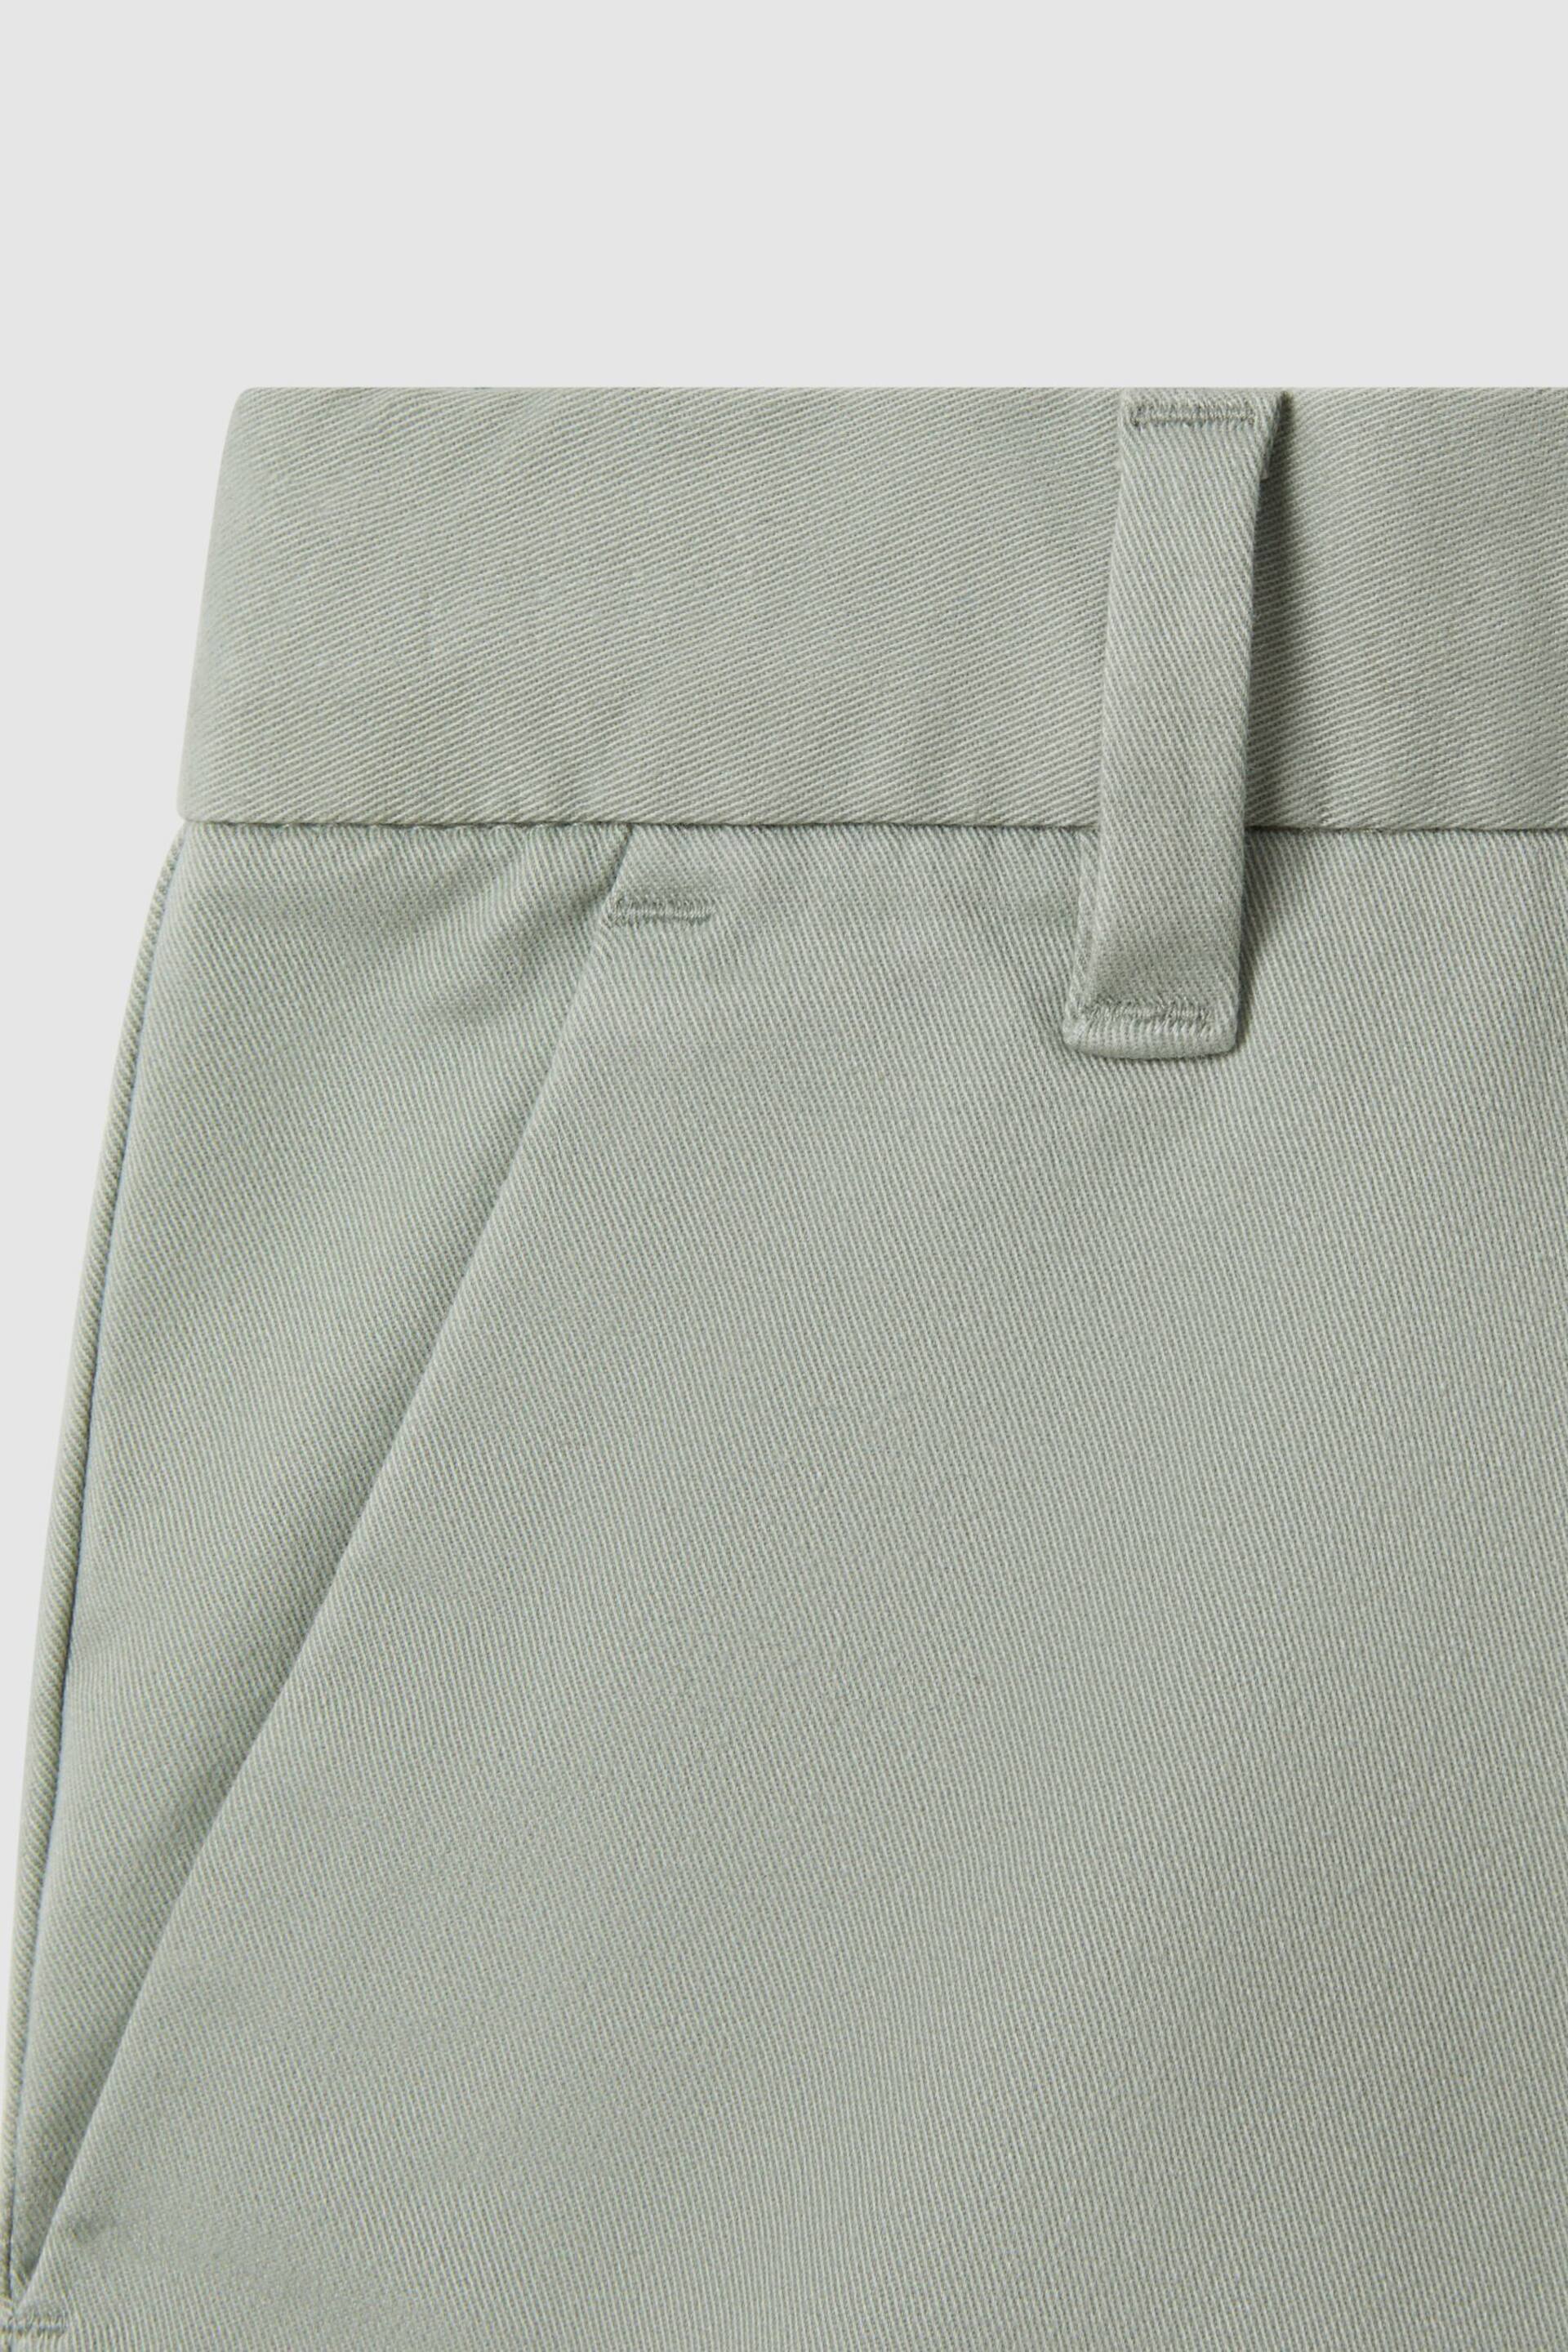 Reiss Pistachio Wicket Teen Casual Chino Shorts - Image 4 of 4